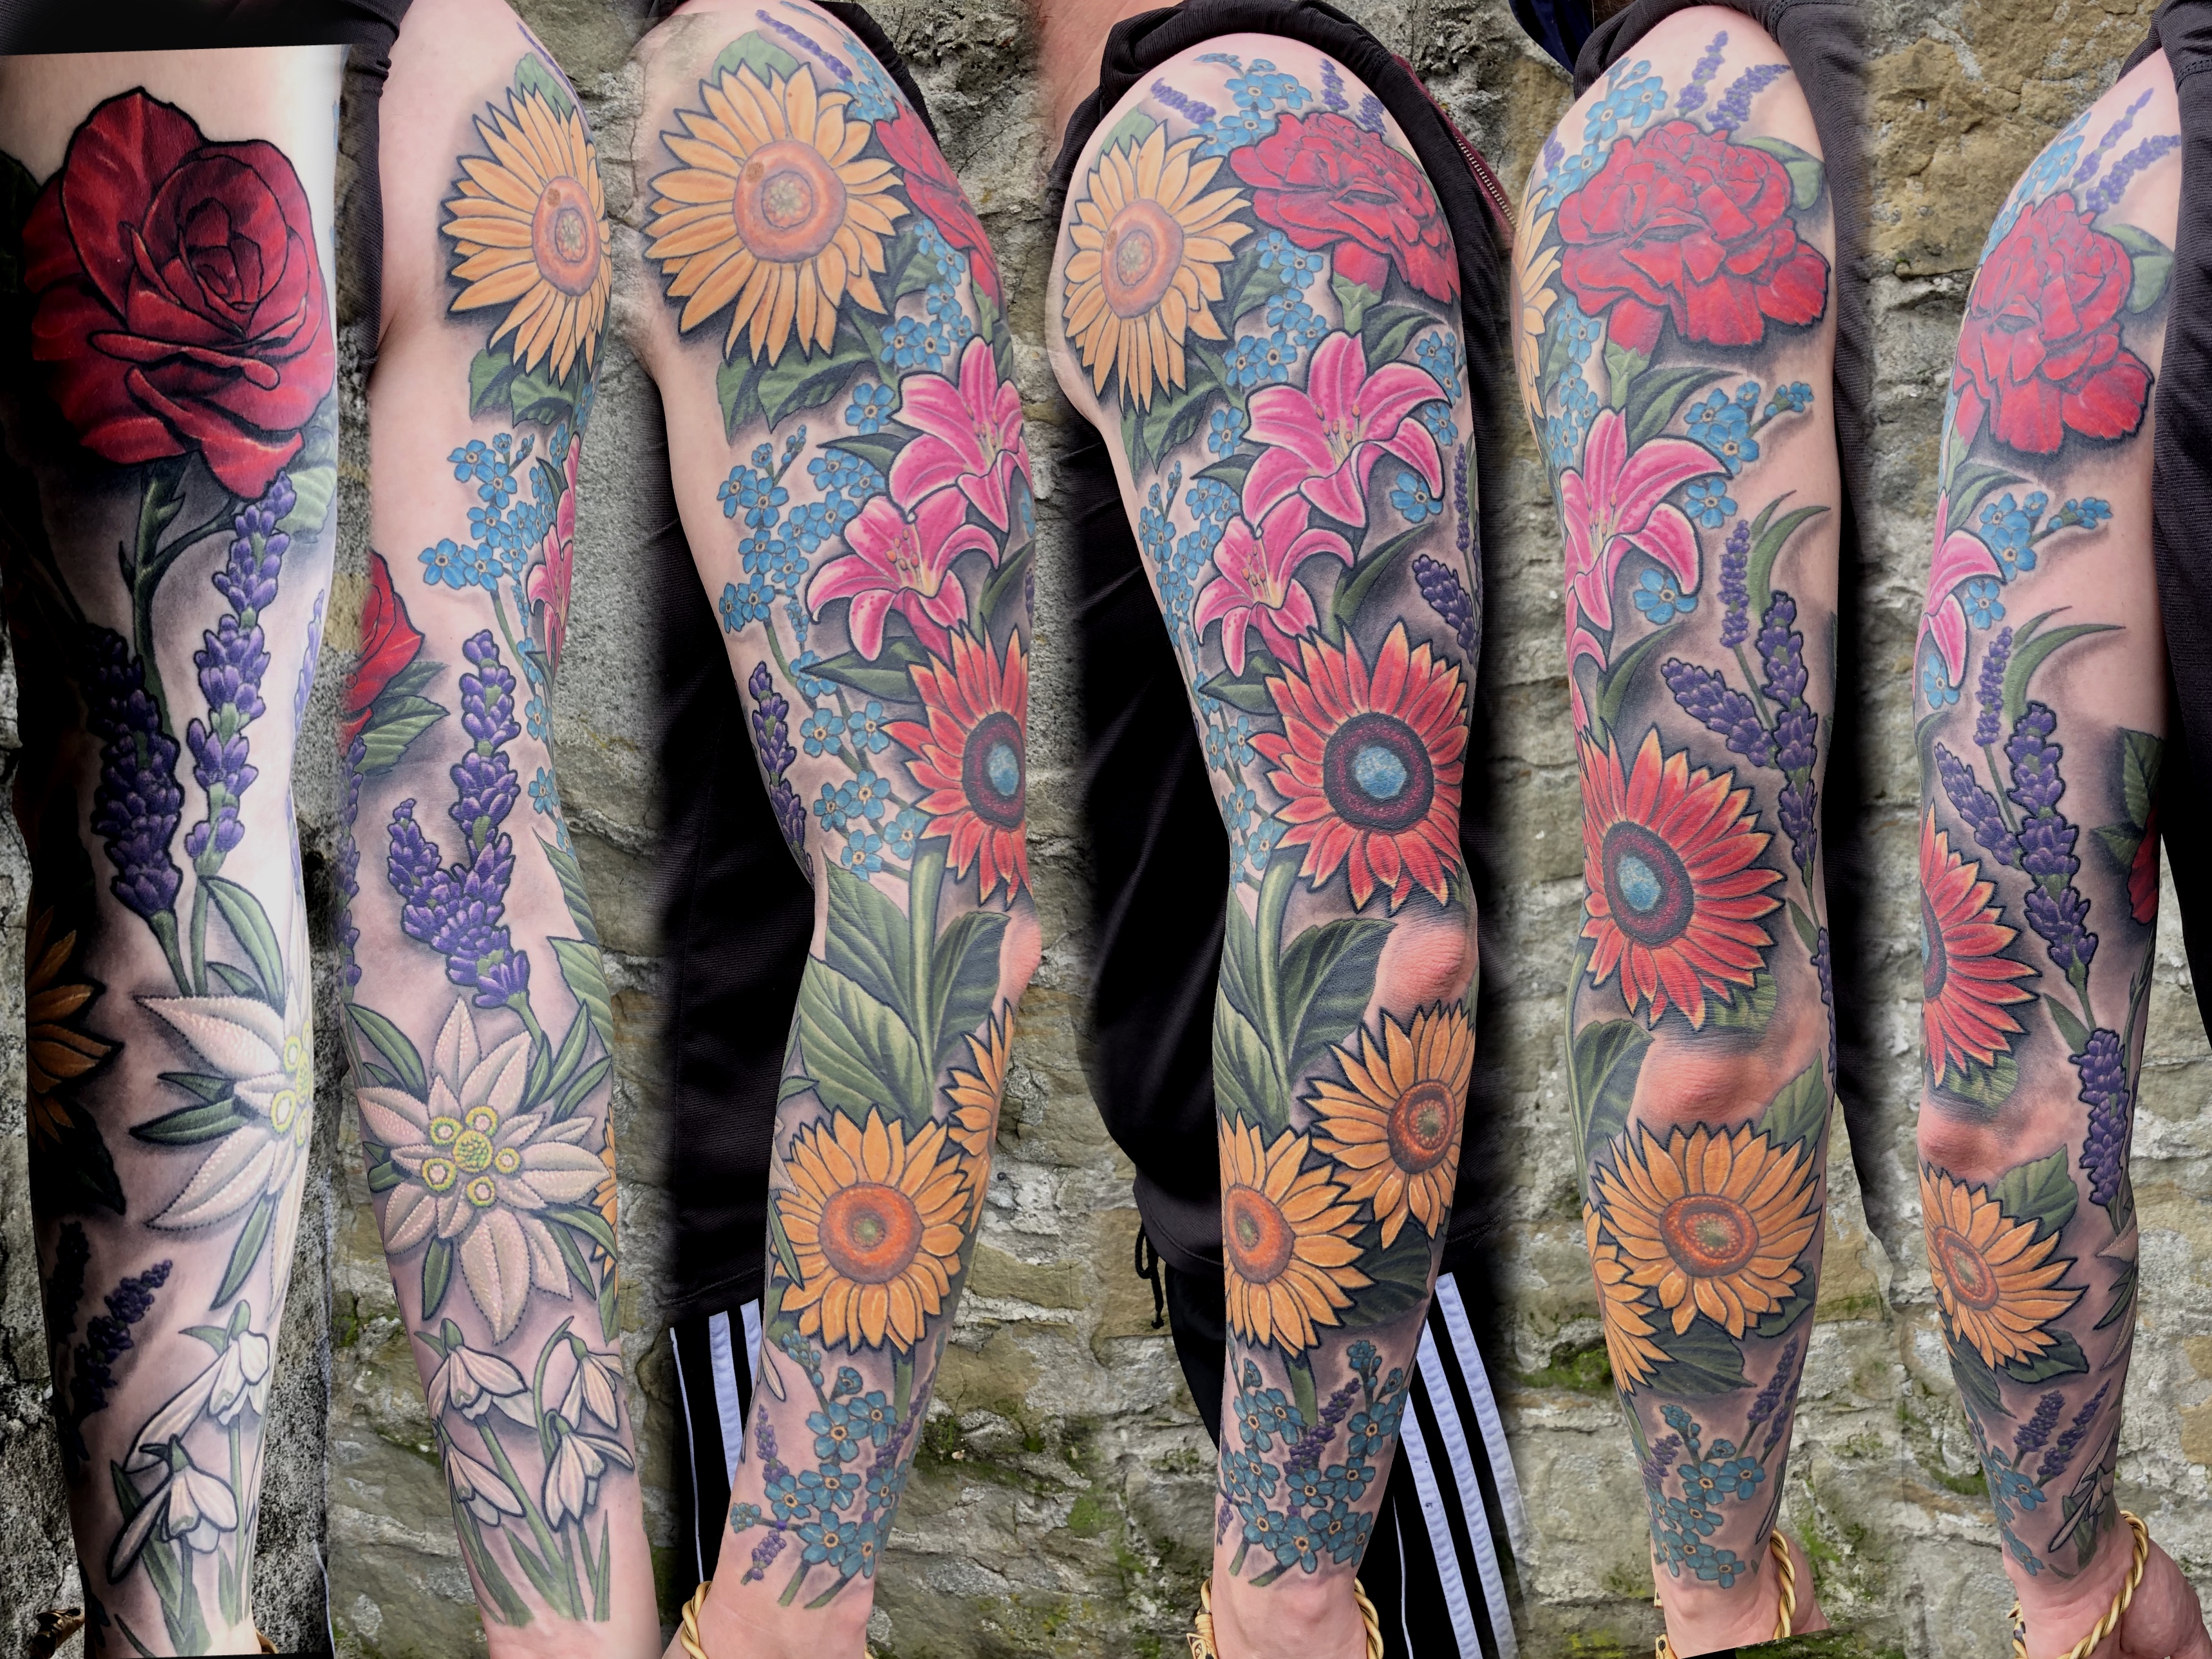 steps for planning a tattoo sleeve